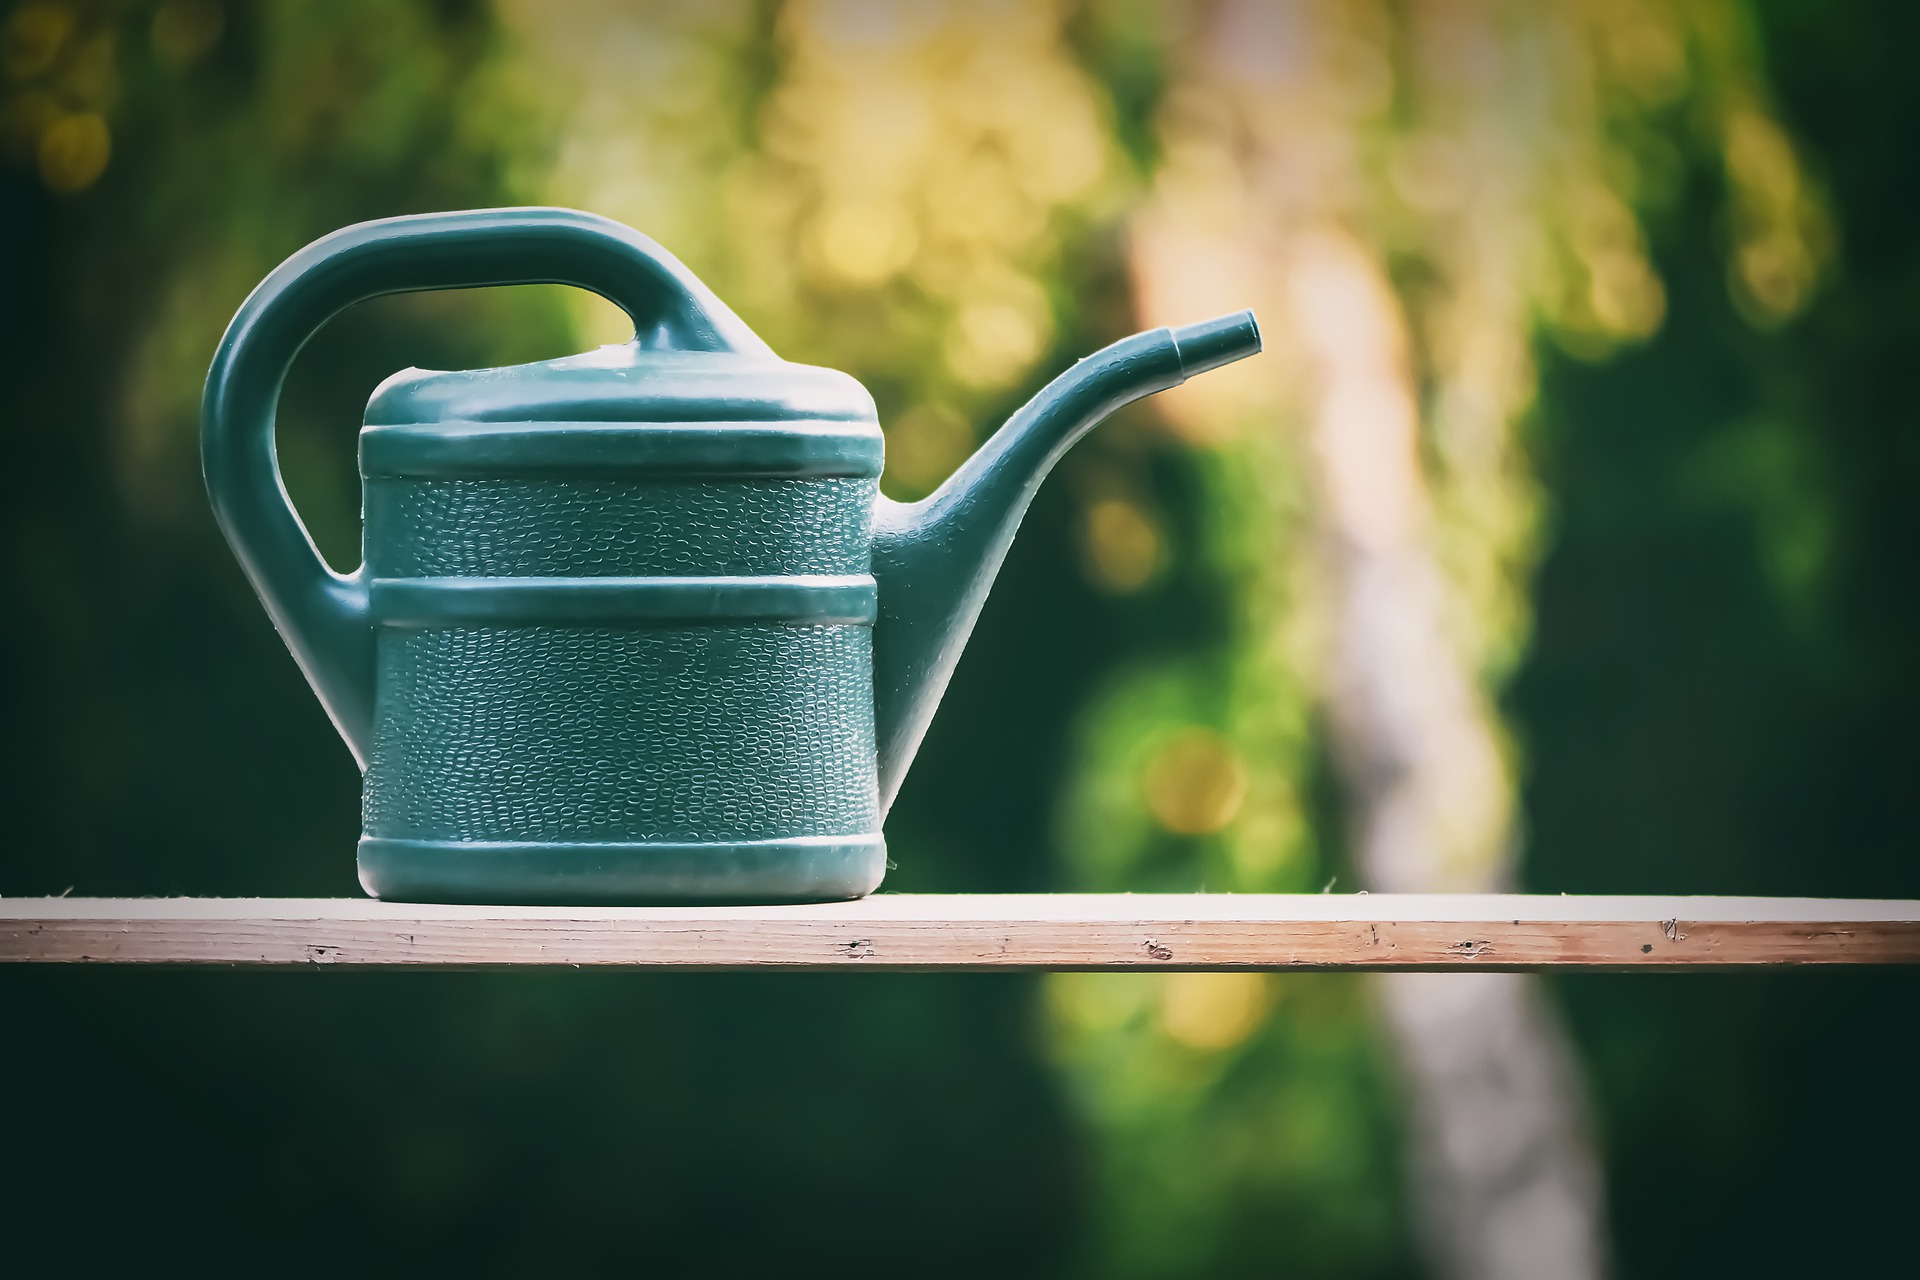 watering-can-5202988_1920